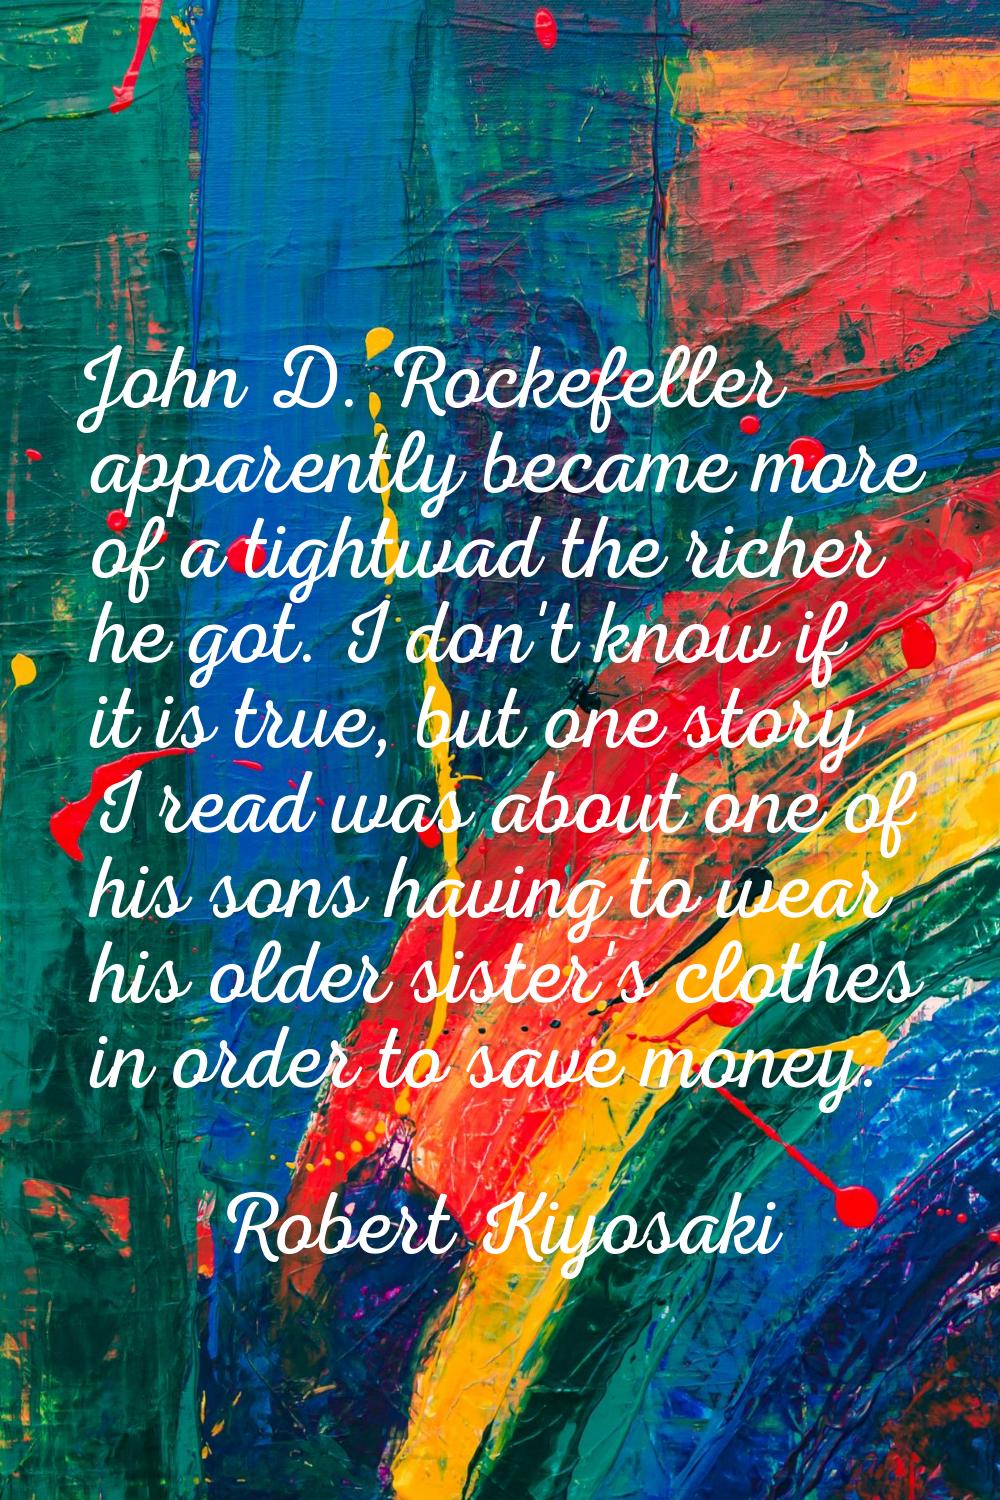 John D. Rockefeller apparently became more of a tightwad the richer he got. I don't know if it is t